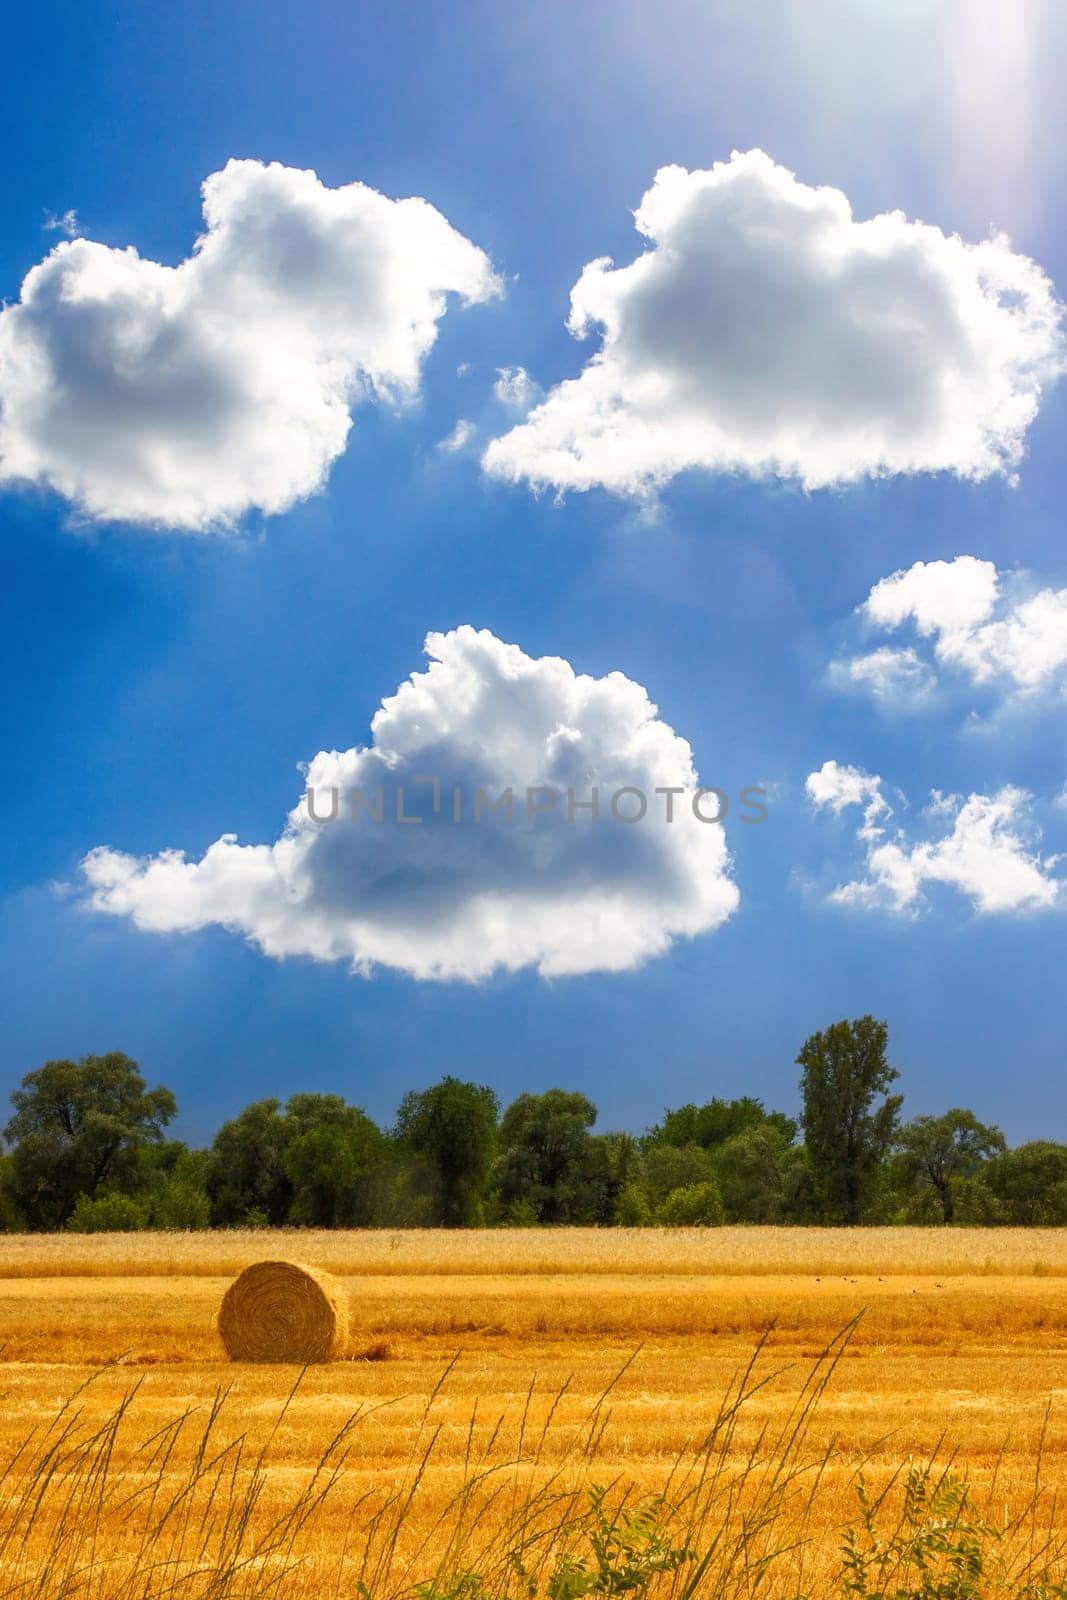 Harvested wheat field at the end of summer, harvesting under a picturesque sky.